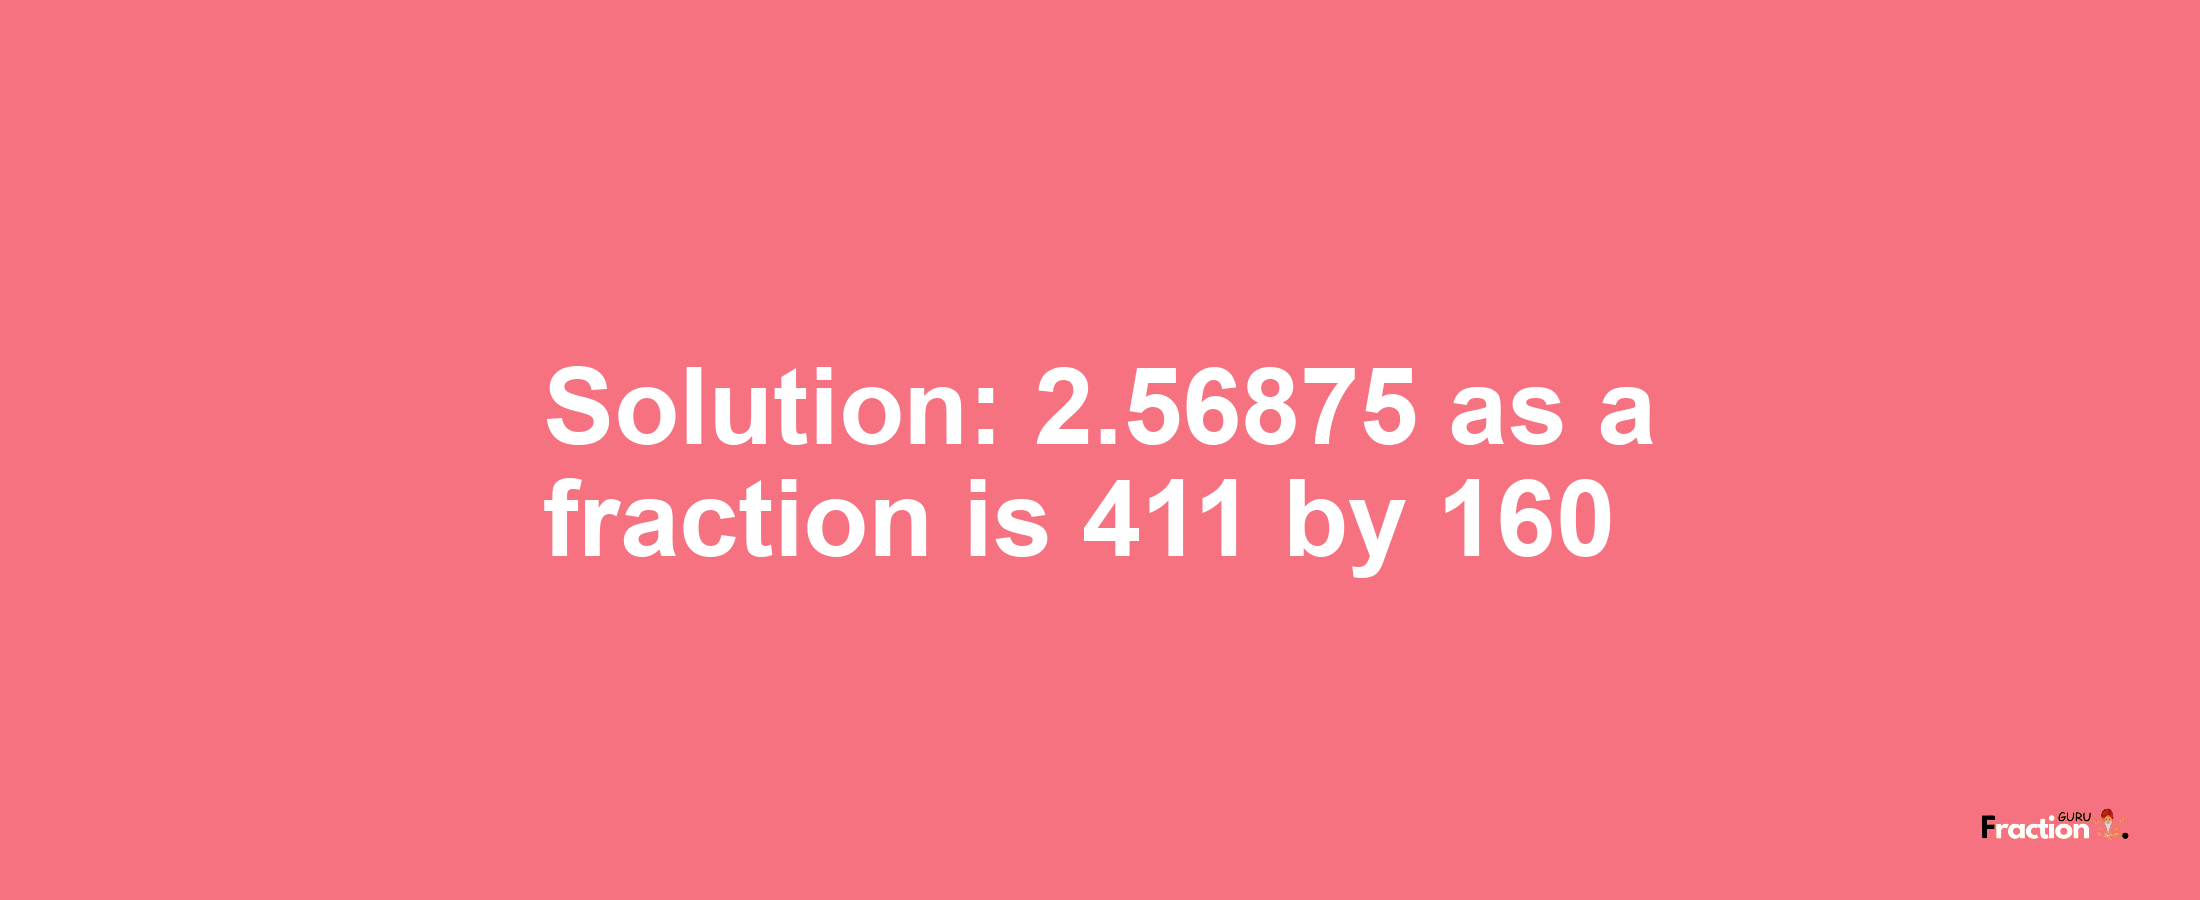 Solution:2.56875 as a fraction is 411/160